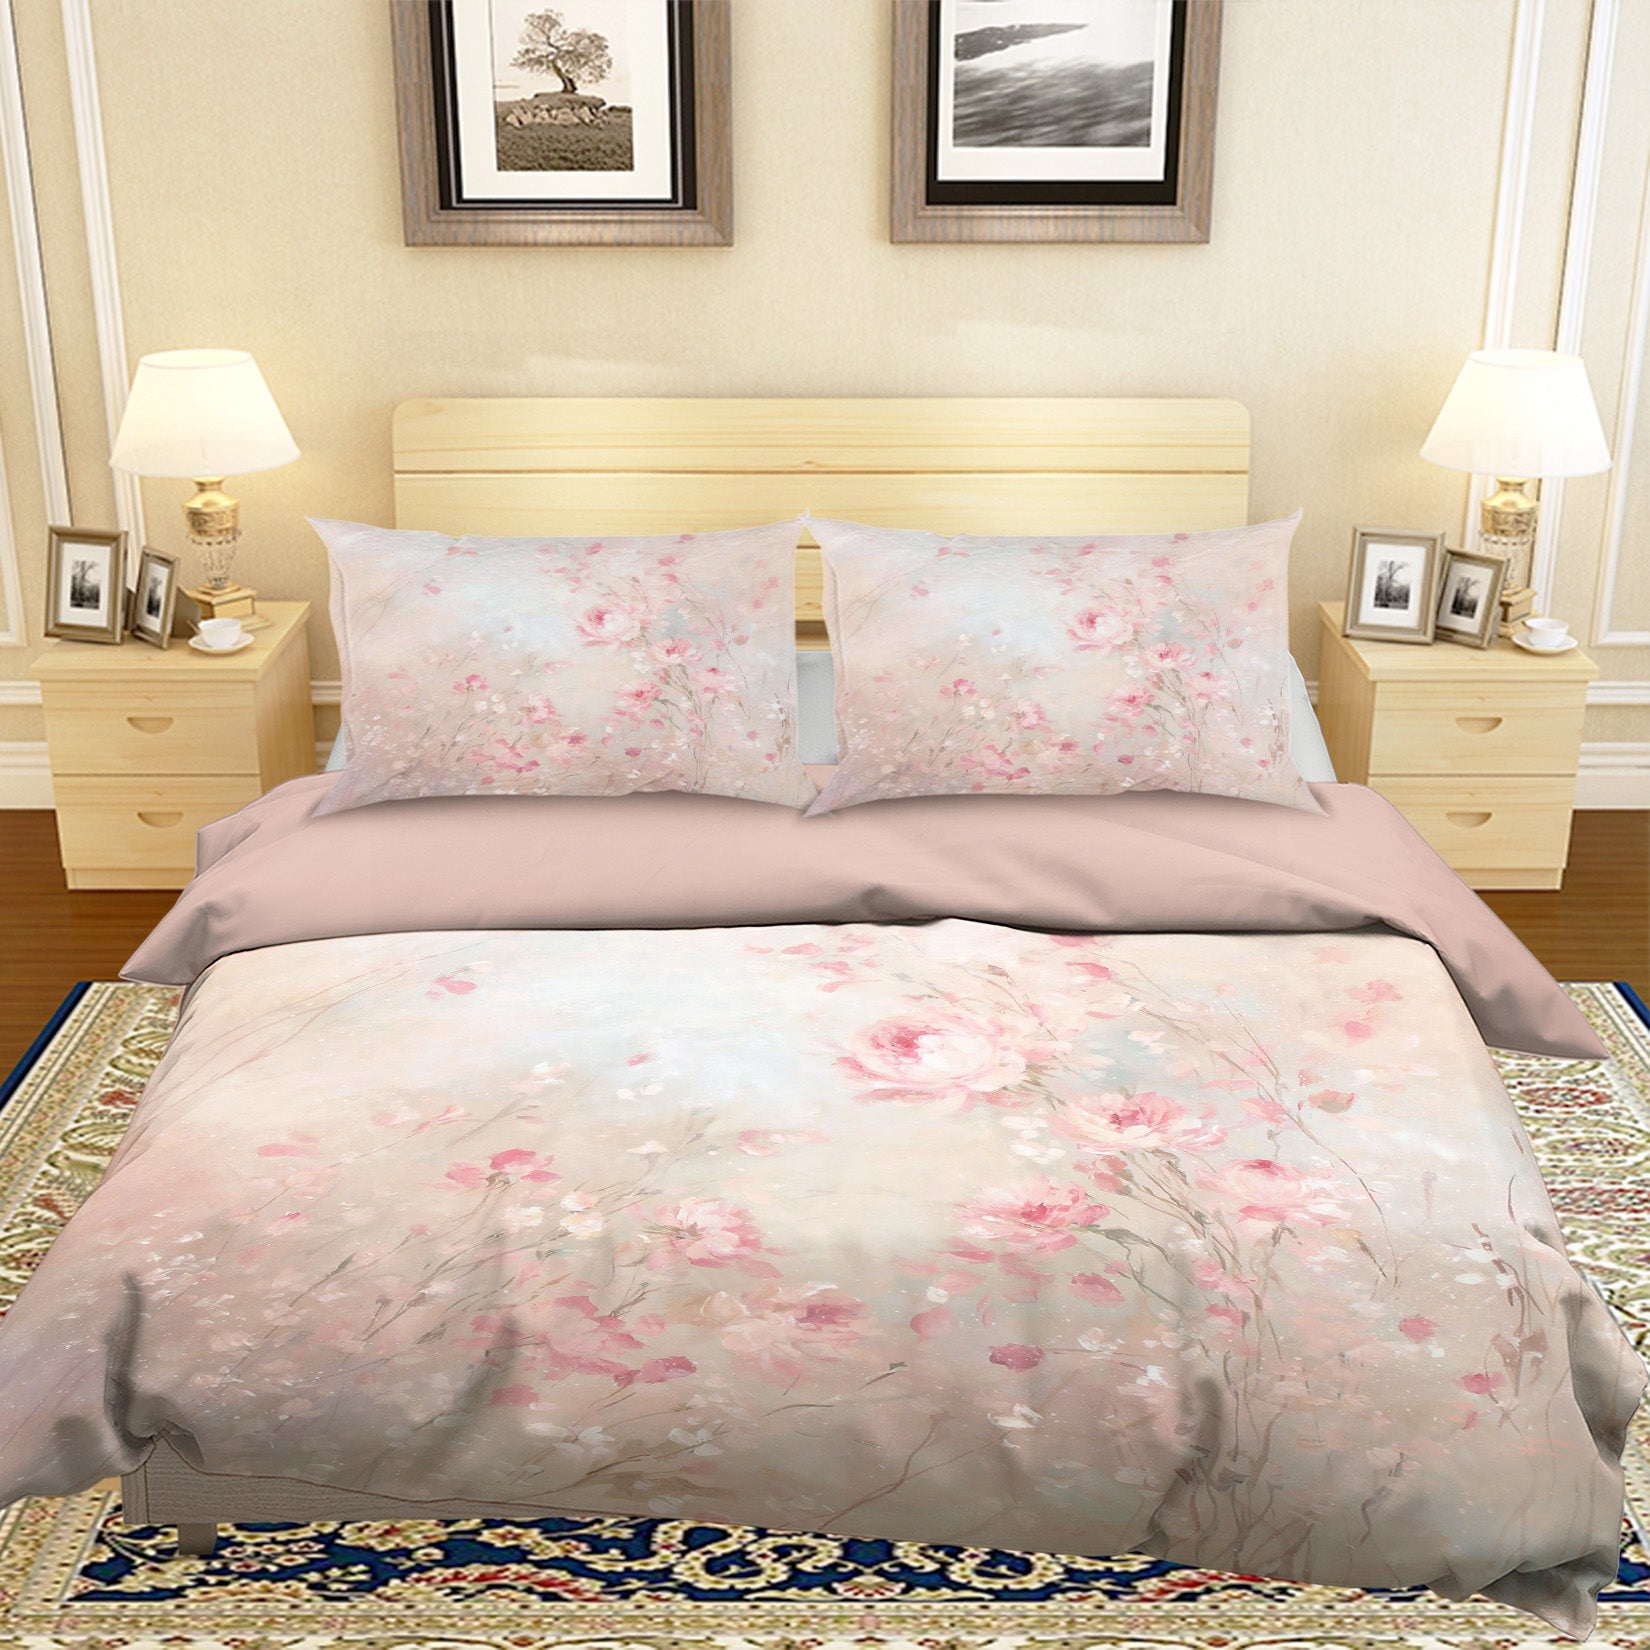 3D Pink Rose 026 Debi Coules Bedding Bed Pillowcases Quilt